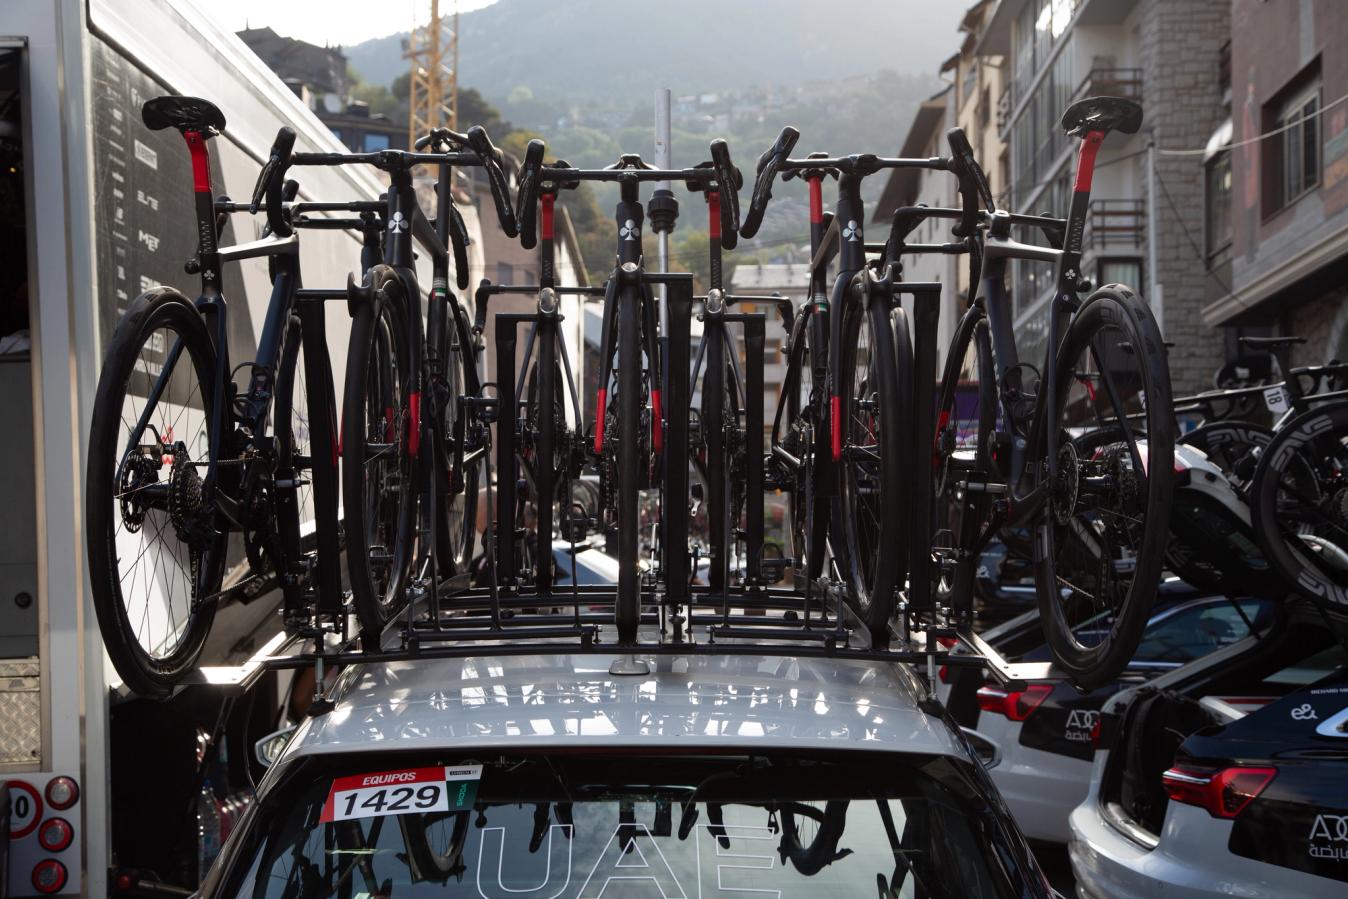 While many of the road bikes are transported on support cars, we spotted the time trial bikes in a storage van